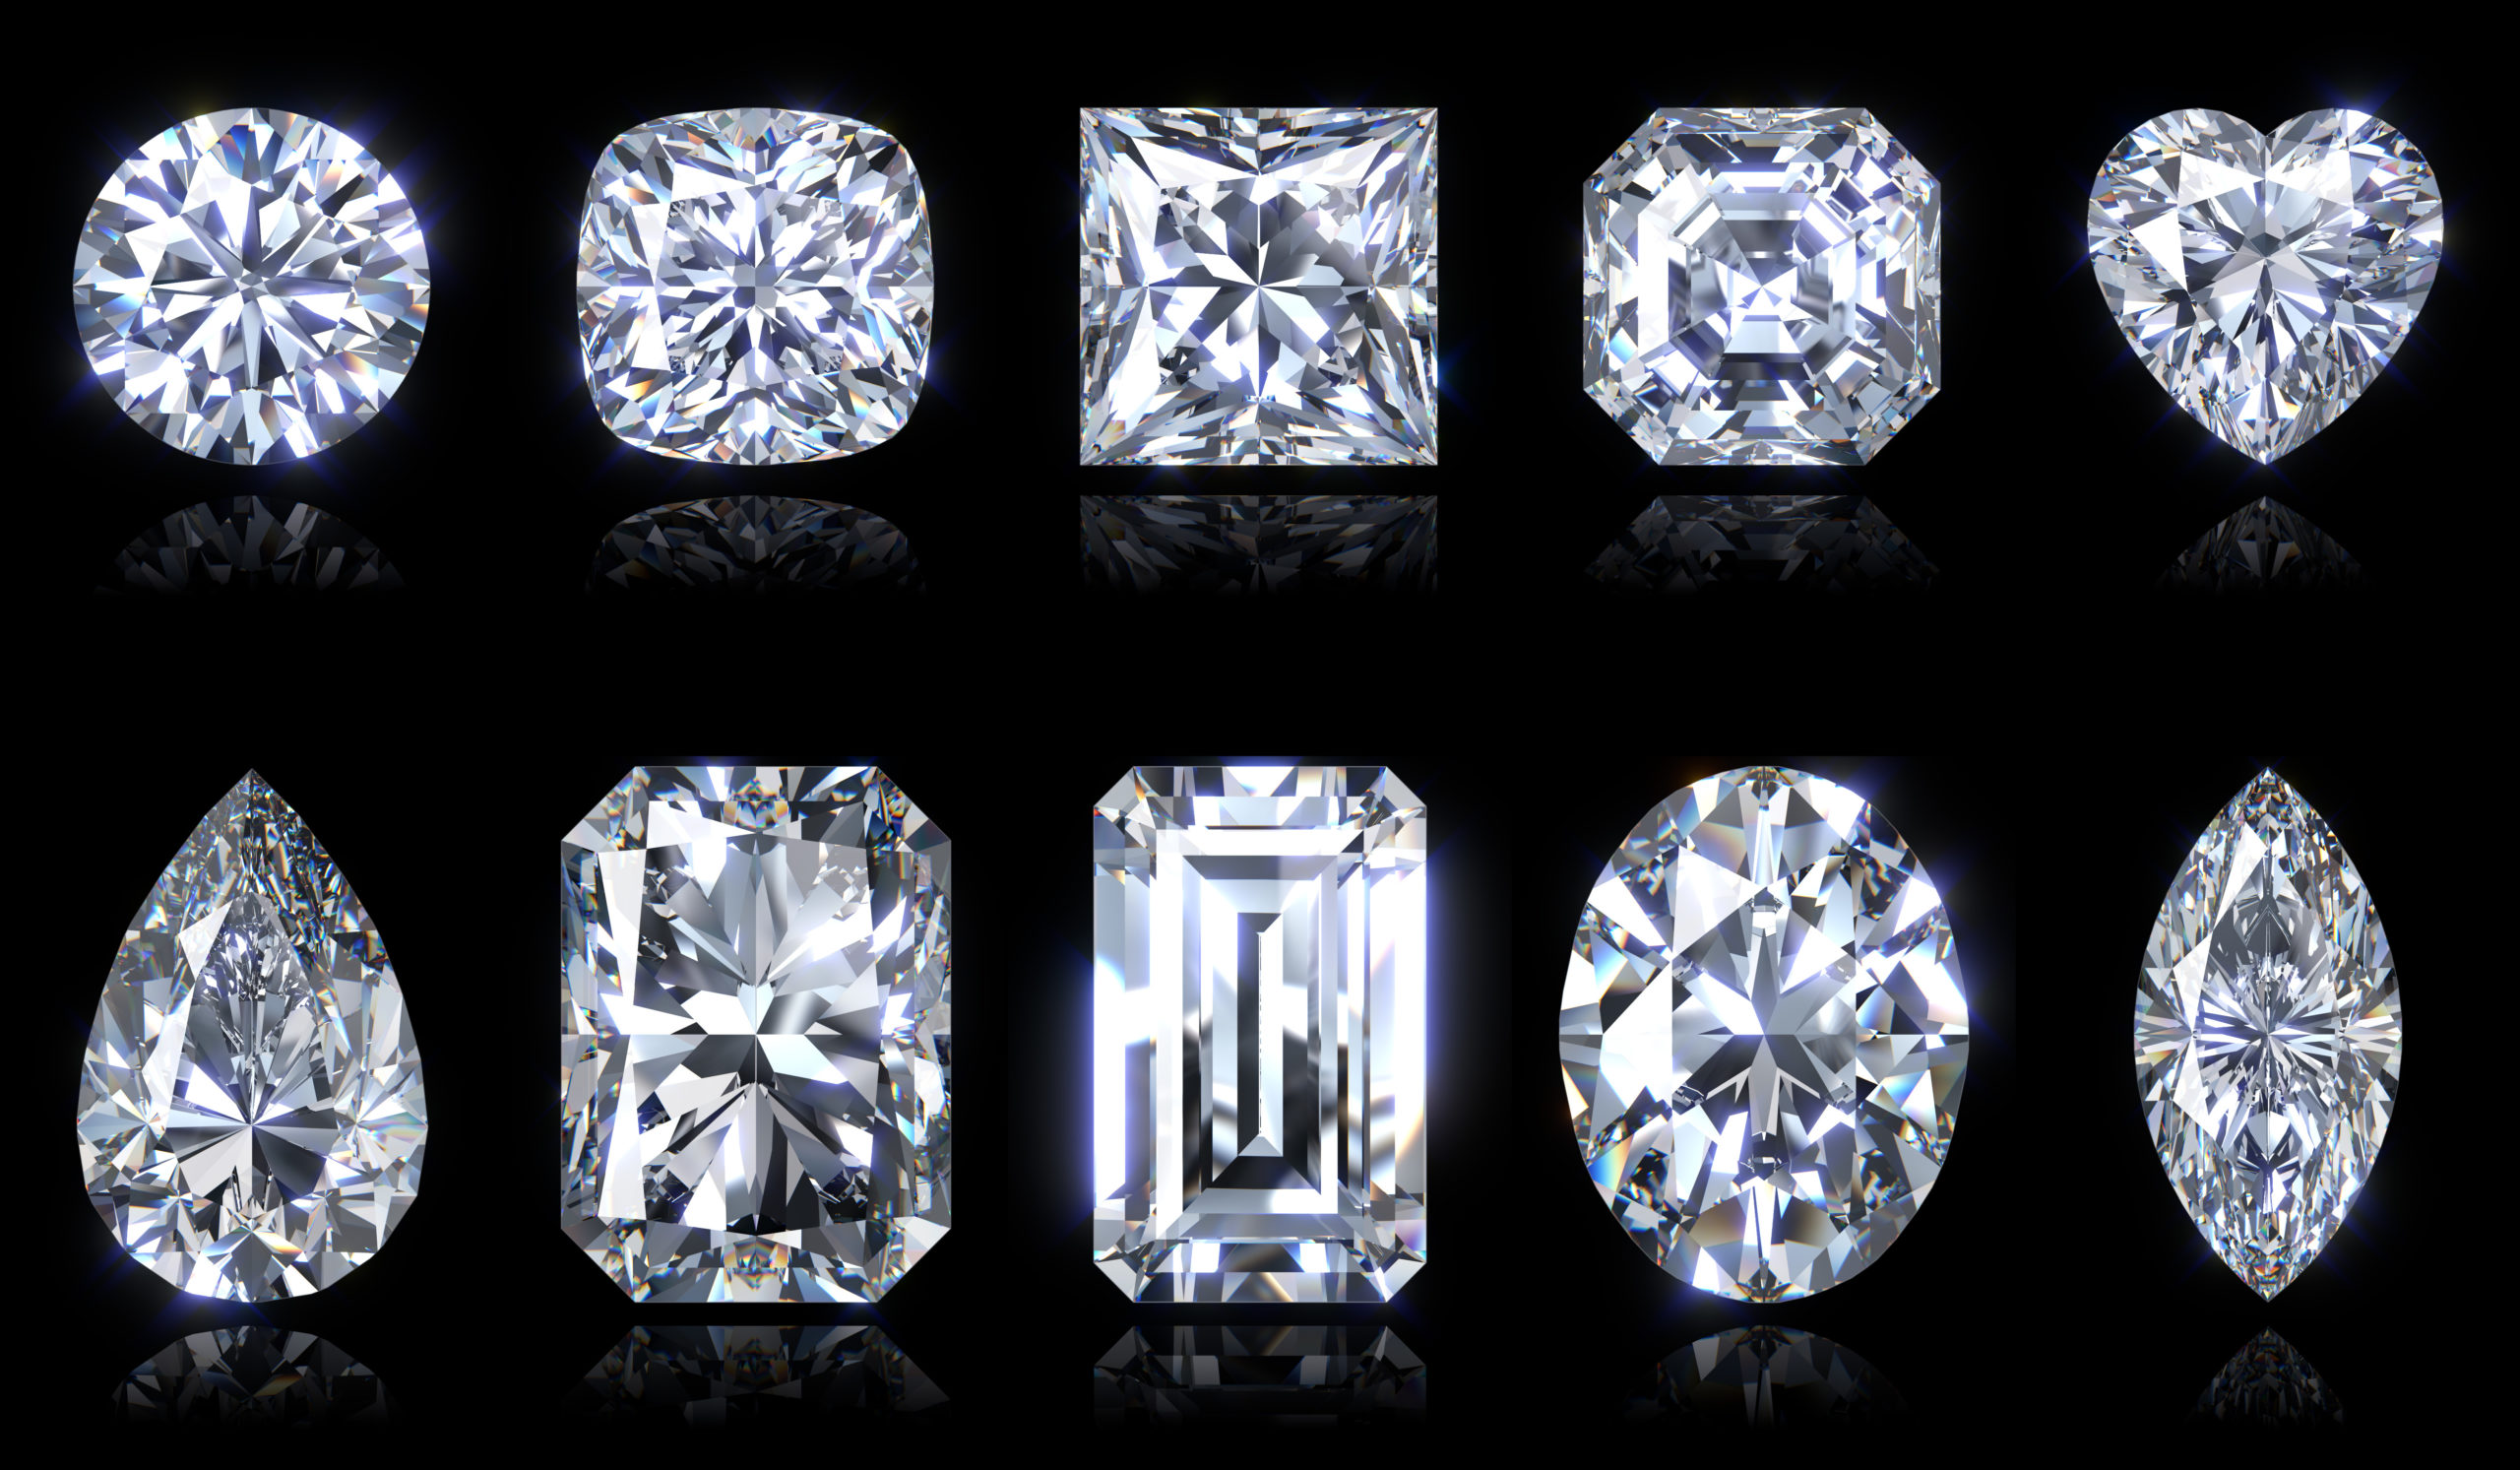 Ten the most popular diamond shapes isolated on black background. 3D